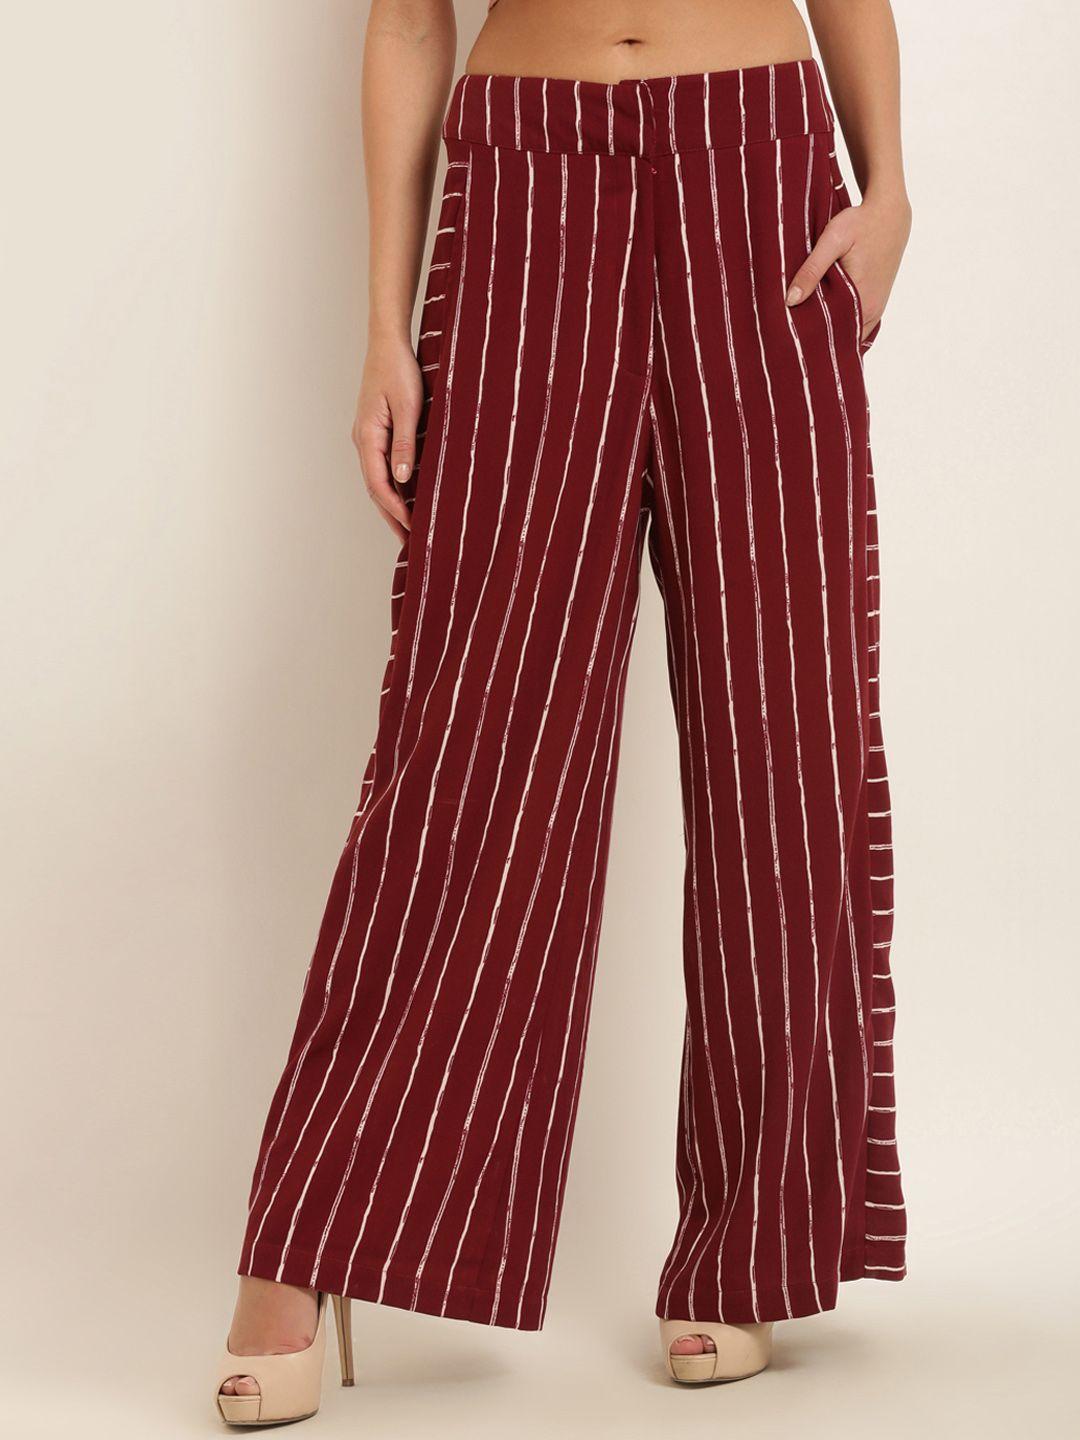 marie claire women maroon & white regular fit striped parallel trousers